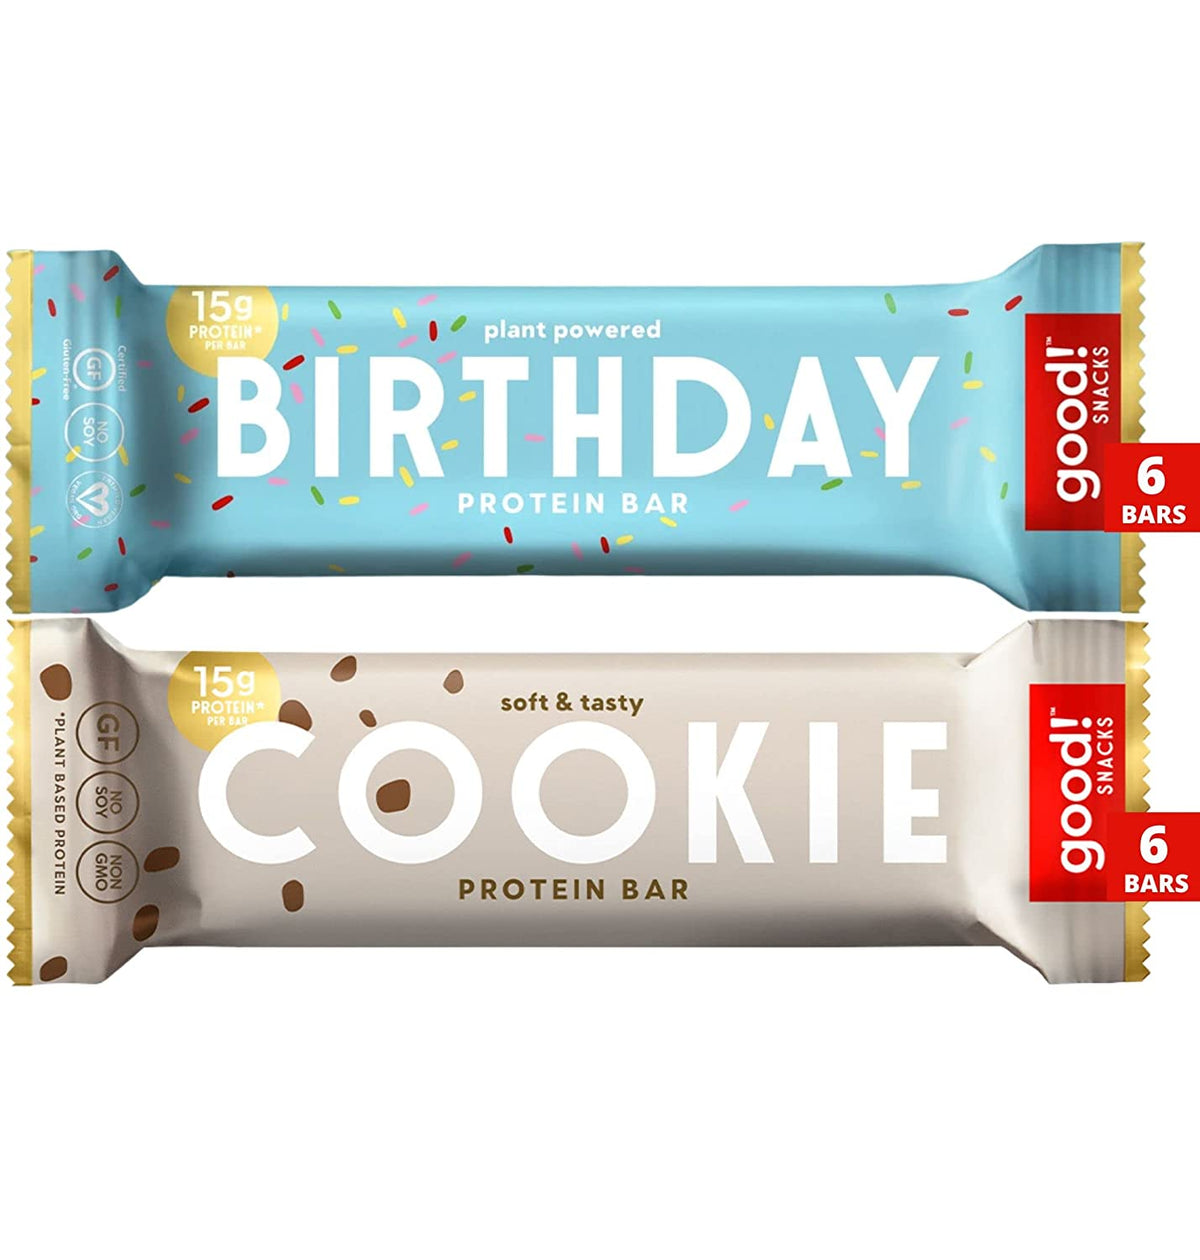 Fan Favorite Variety Pack Birthday and Cookie!